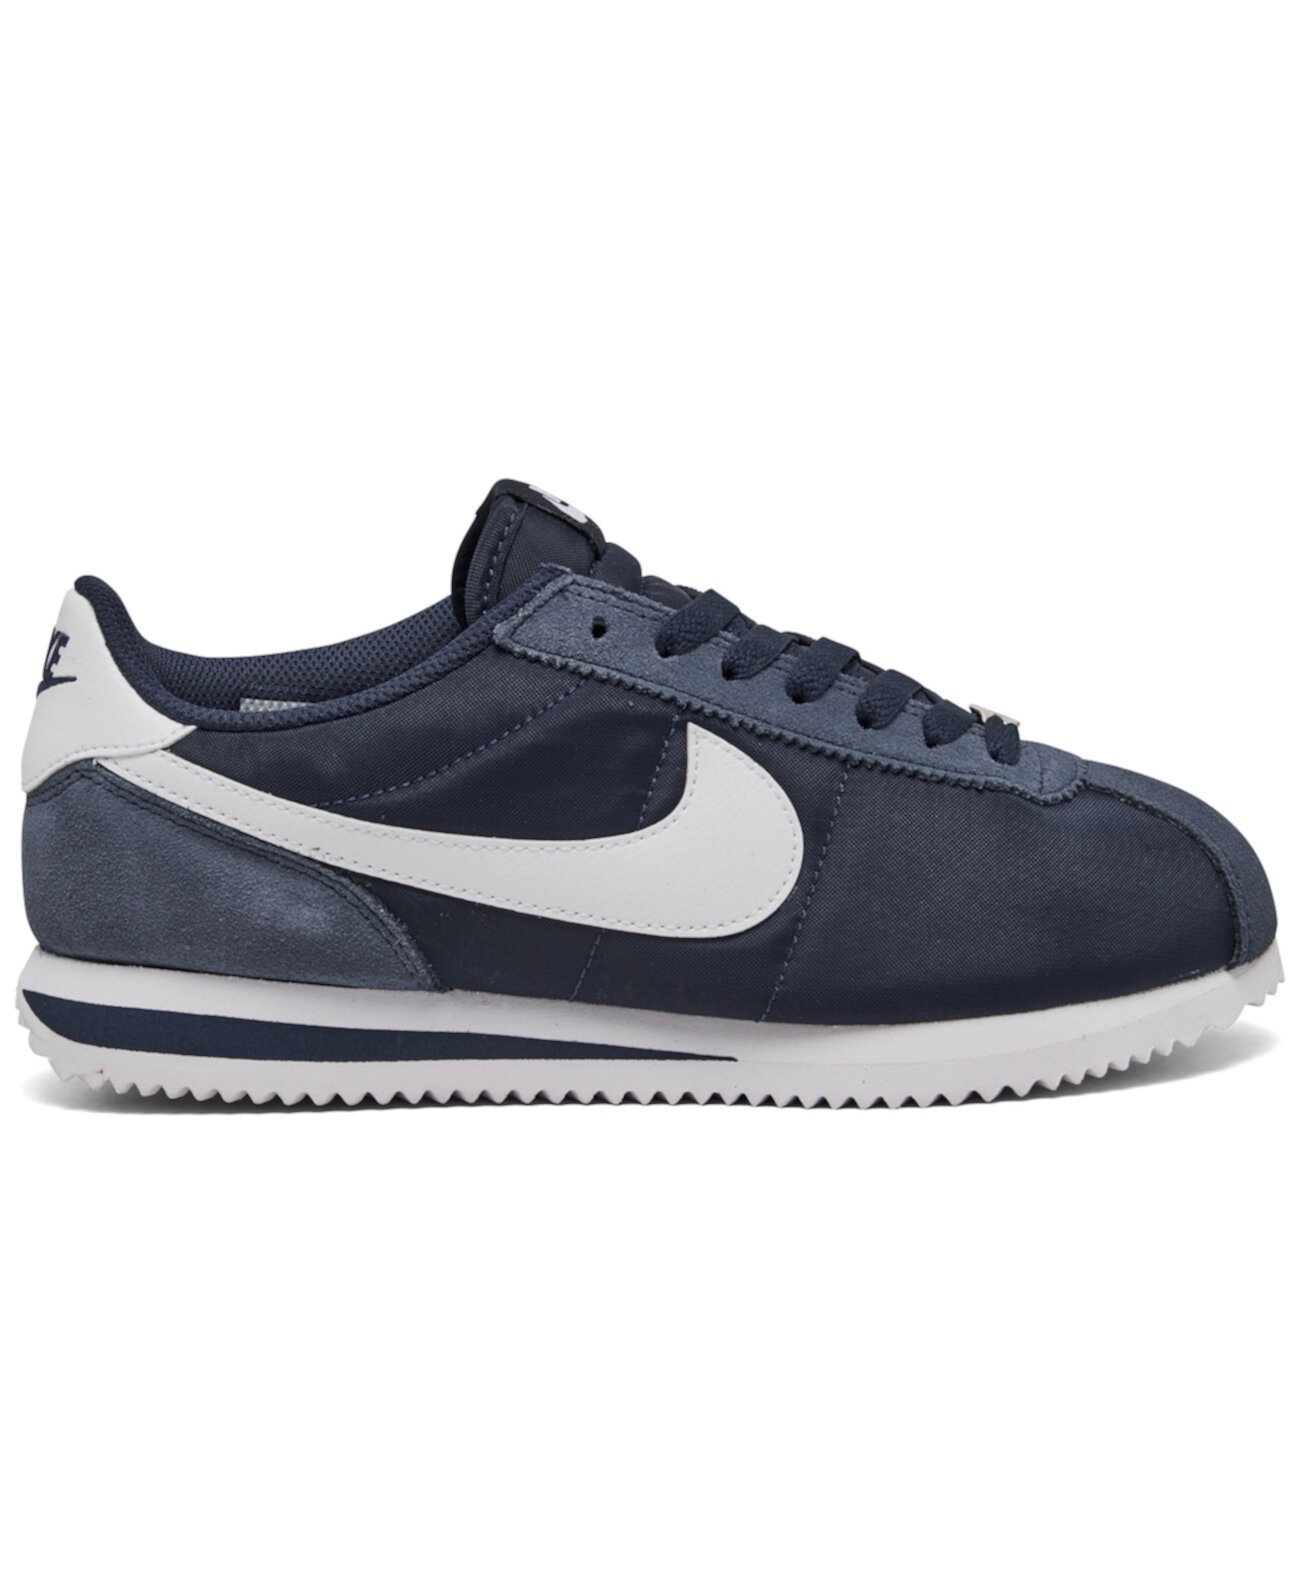 Women's Classic Cortez Nylon Casual Sneakers from Finish Line Nike